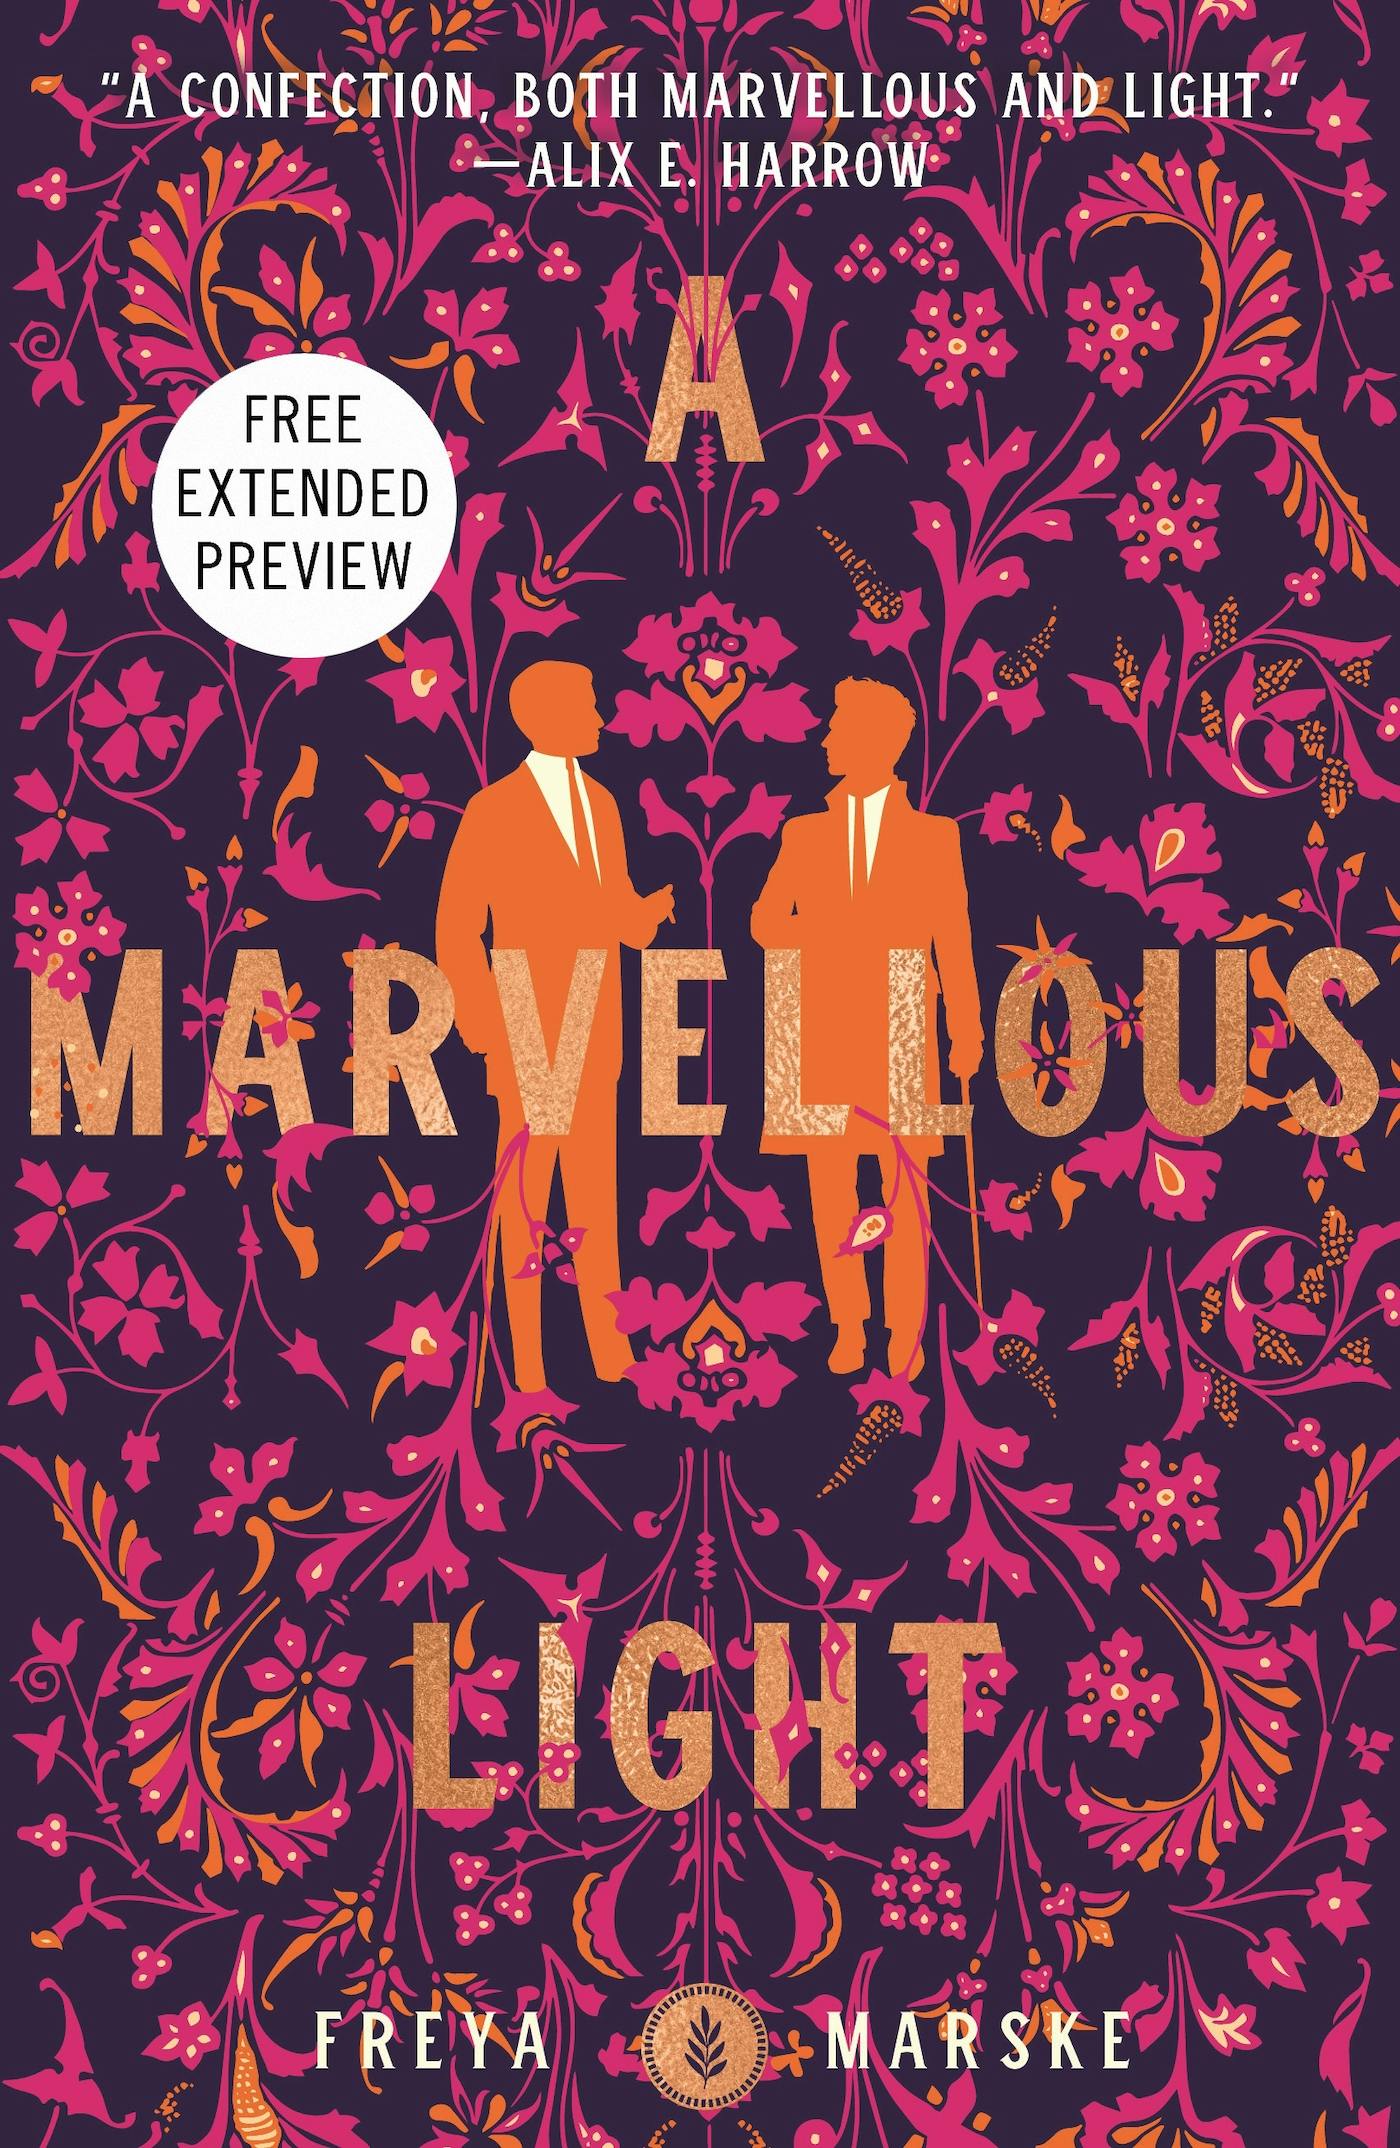 Cover for the book titled as: A Marvellous Light Sneak Peek